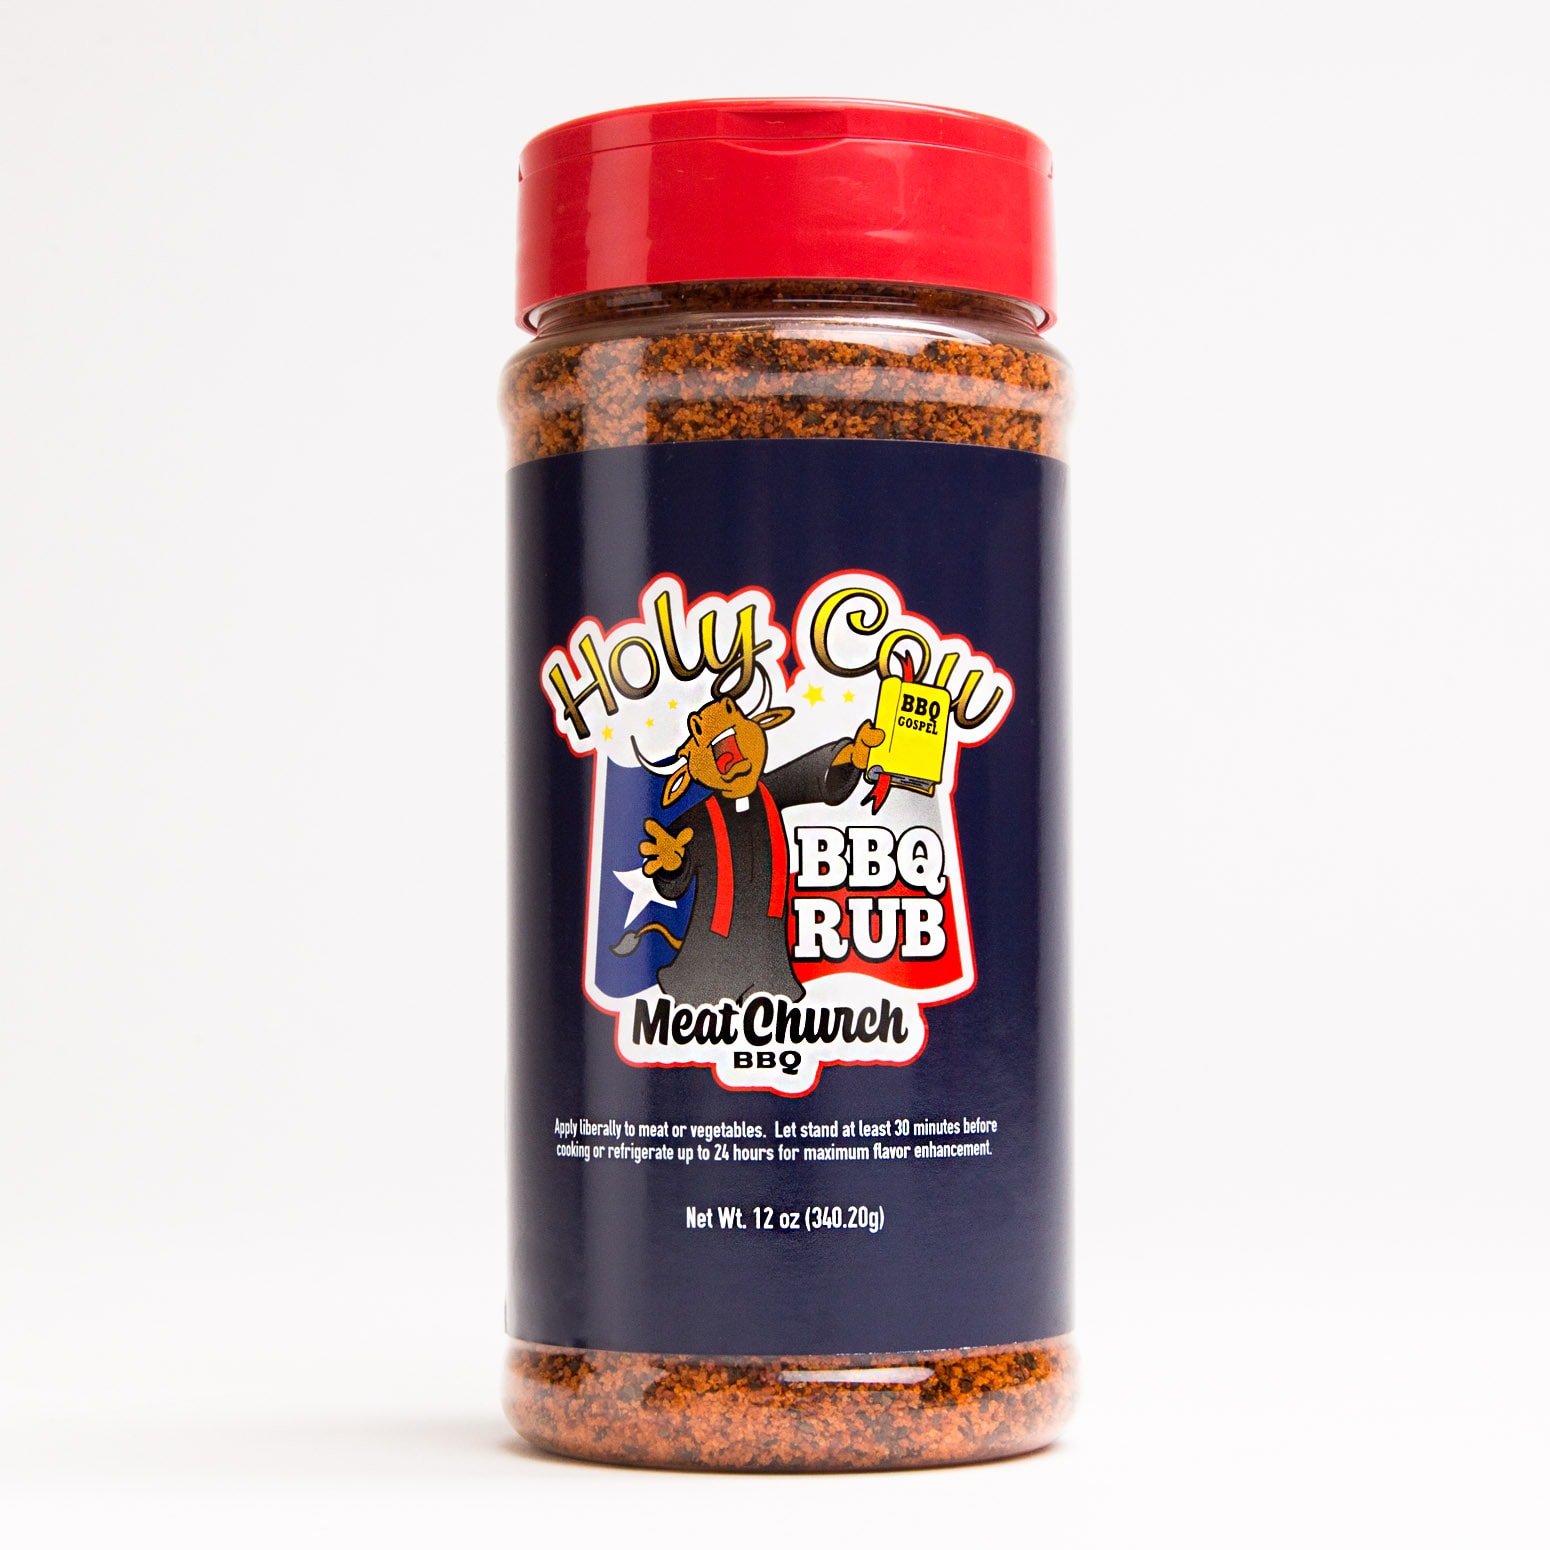 Pick 2 Weber Grill Dry Rub for Smoking & Barbecue 12 oz - 15 oz